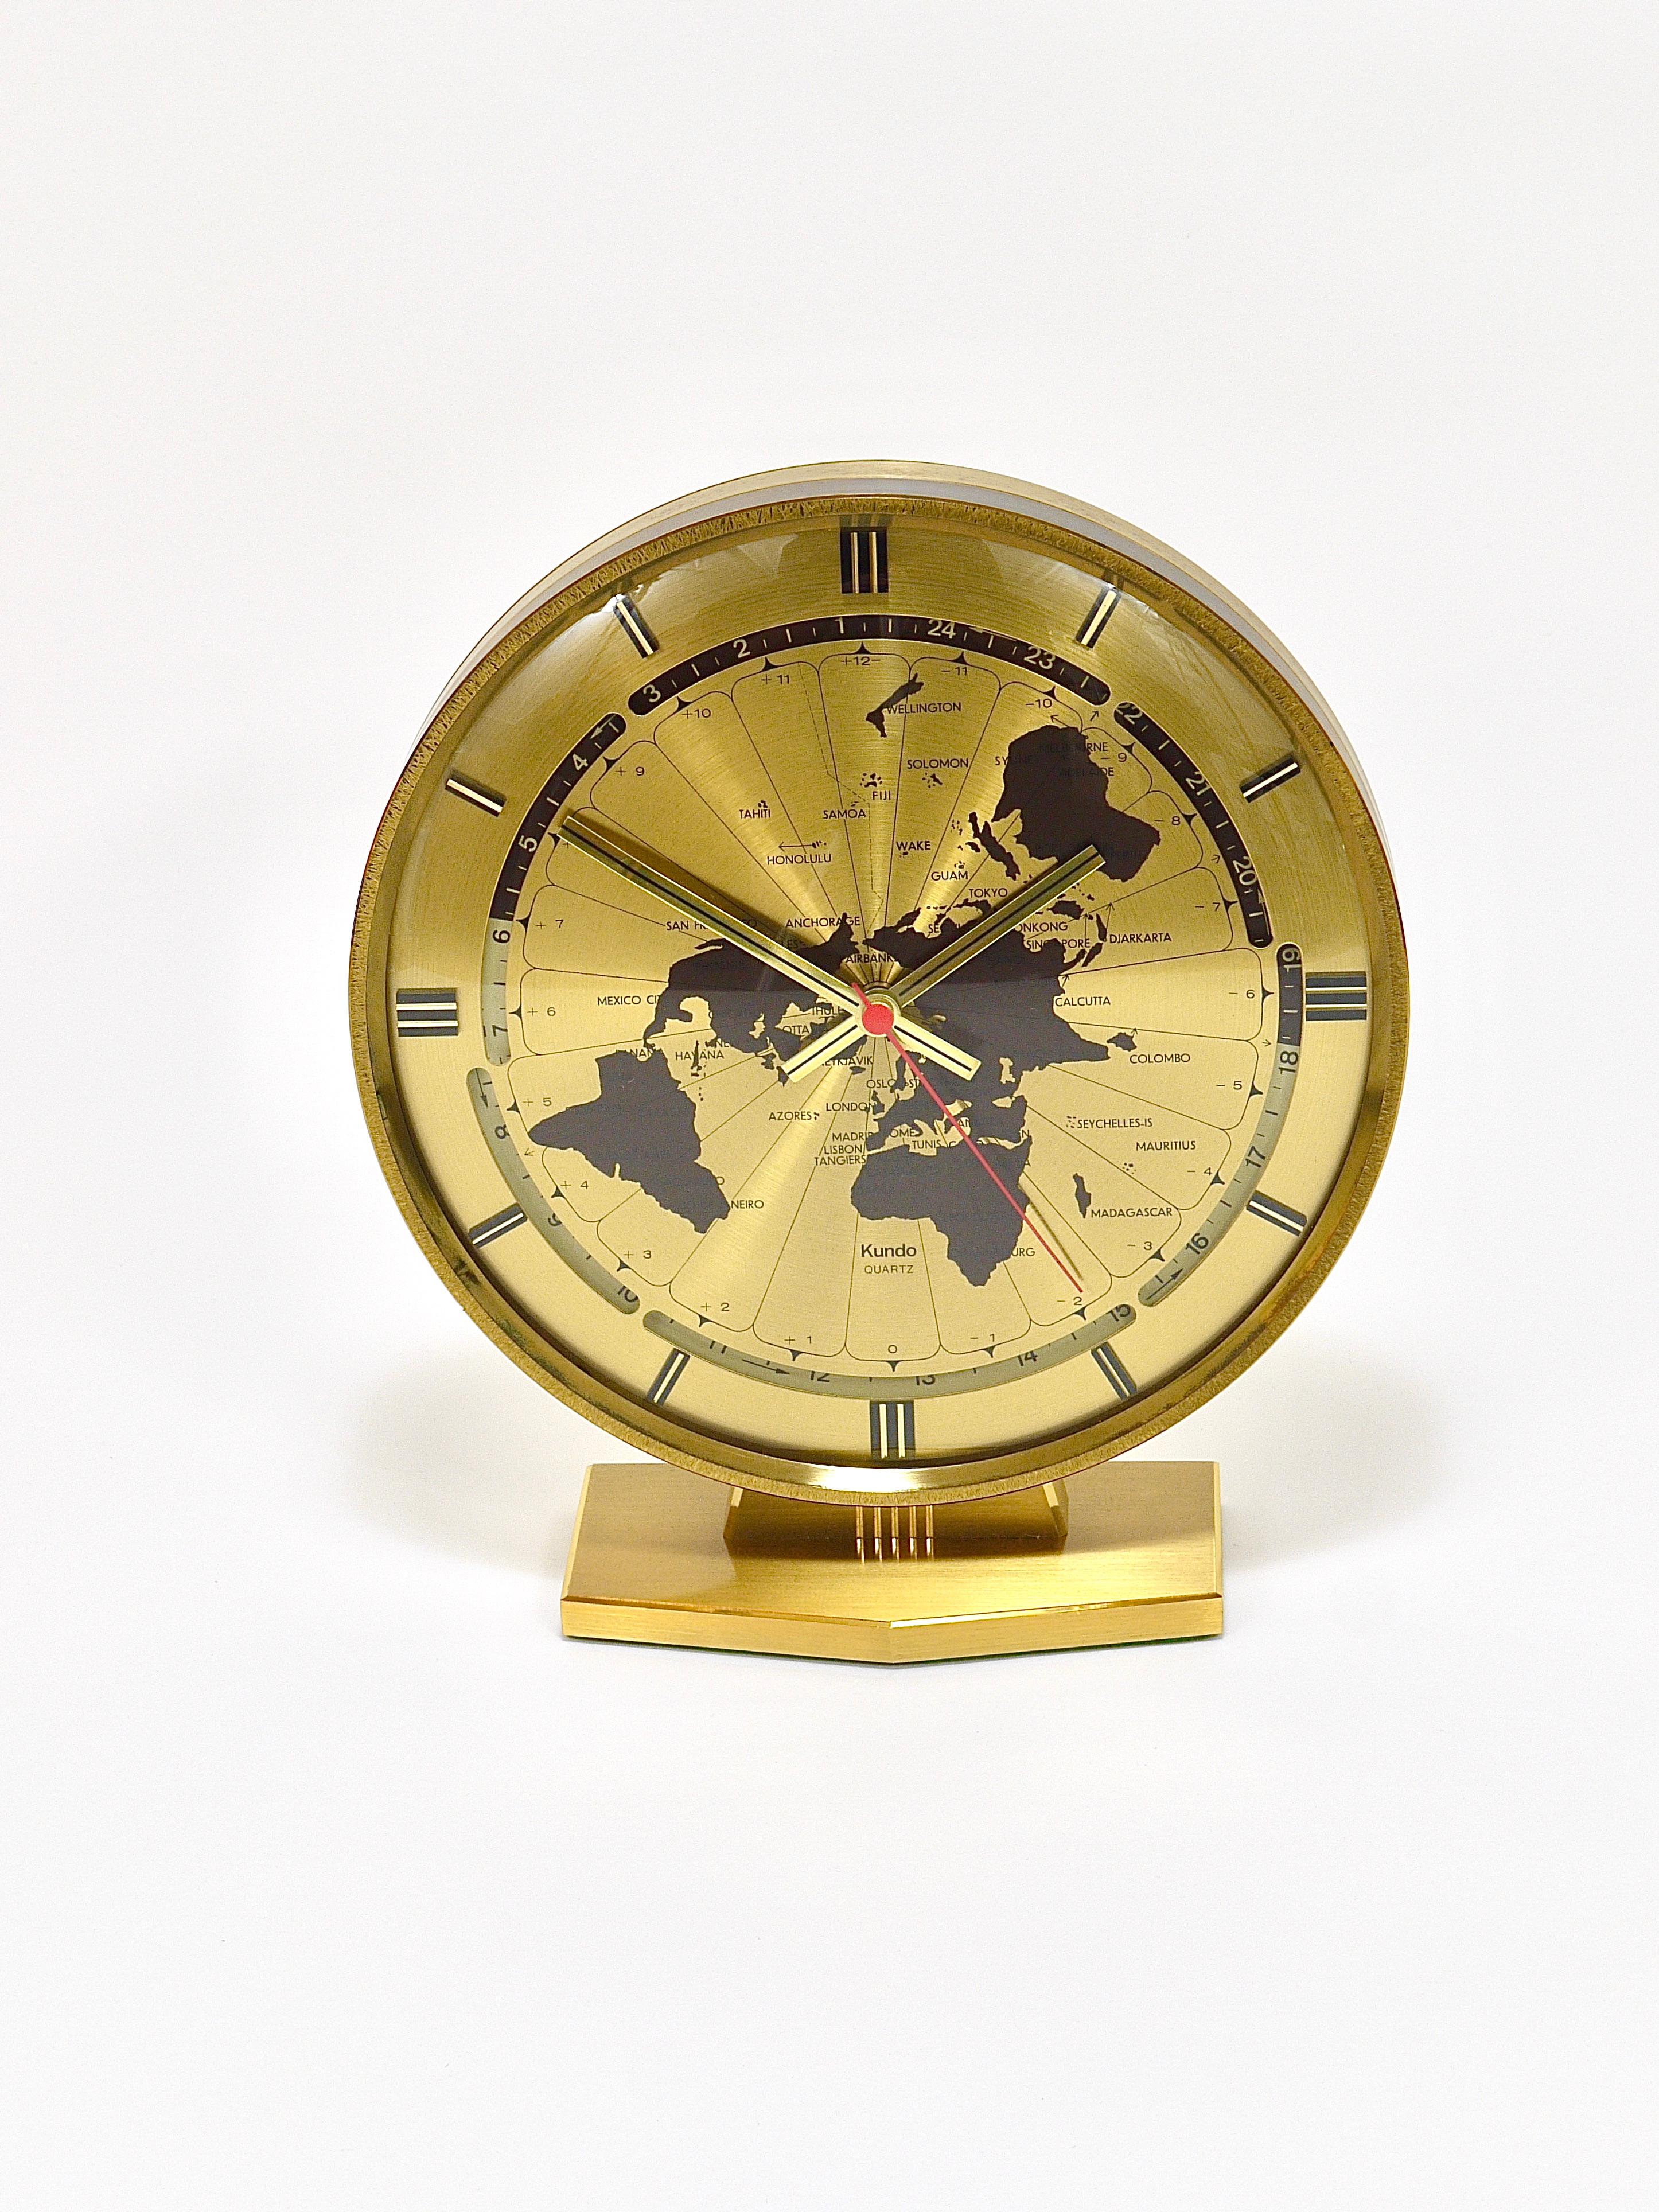 Large Kundo GMT World Time Zone Brass Table Clock, Kieninger & Obergfell, 1960s For Sale 9